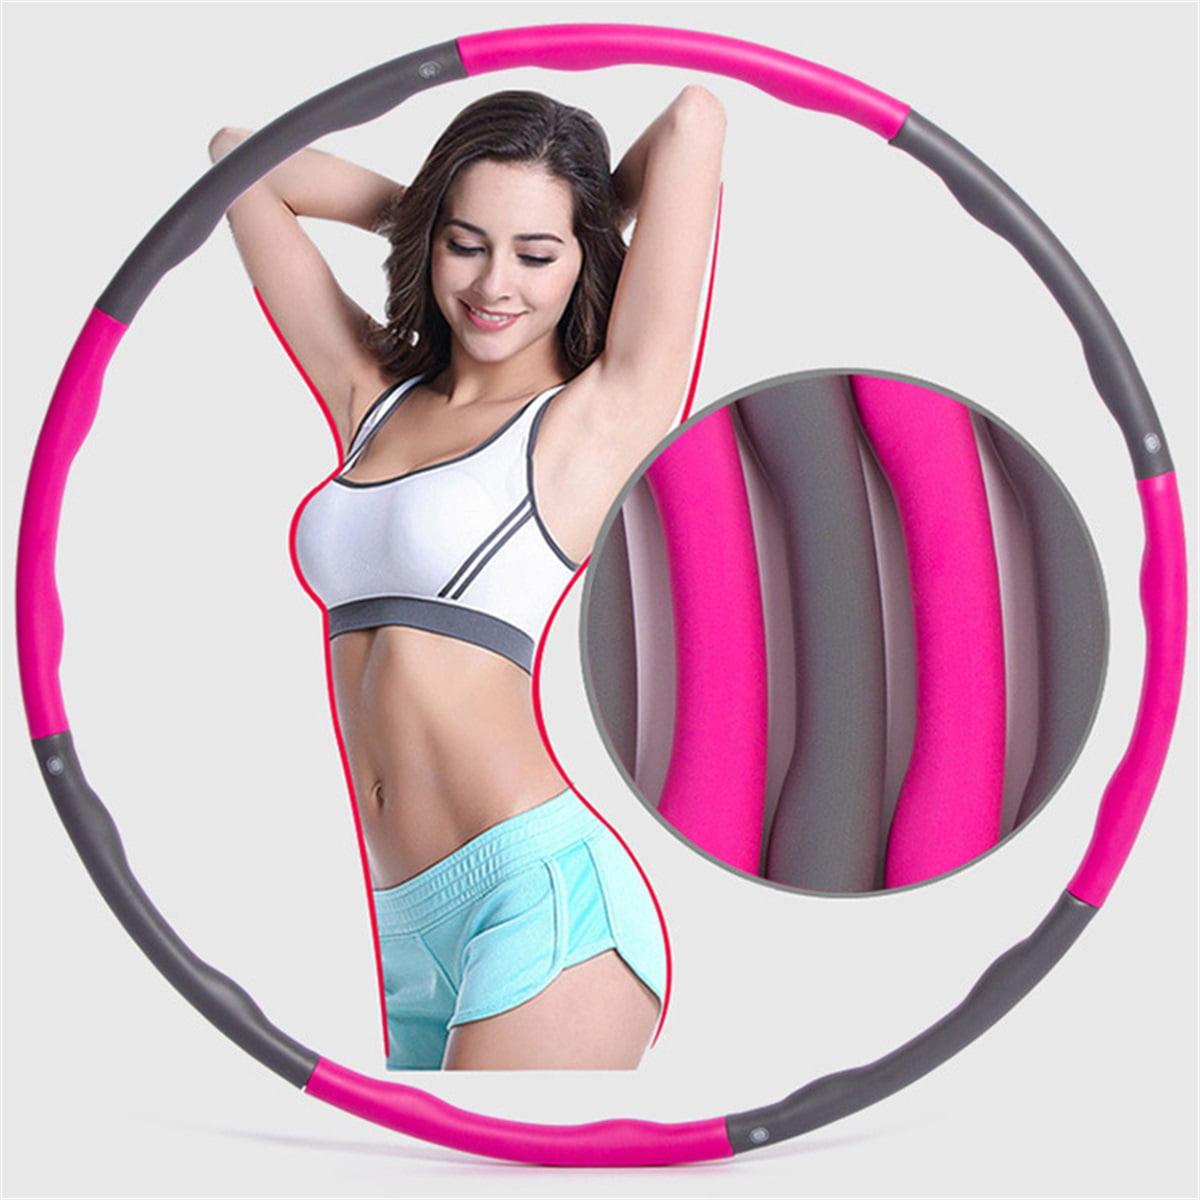 Fitness Exercise Weighted Hoops,Horuhue Heavy Fitness Hoop,8 Sections Adjustable Weights Professional Soft Exercise Hoop Suitable for Fitness/Home/Stomach Shaping 